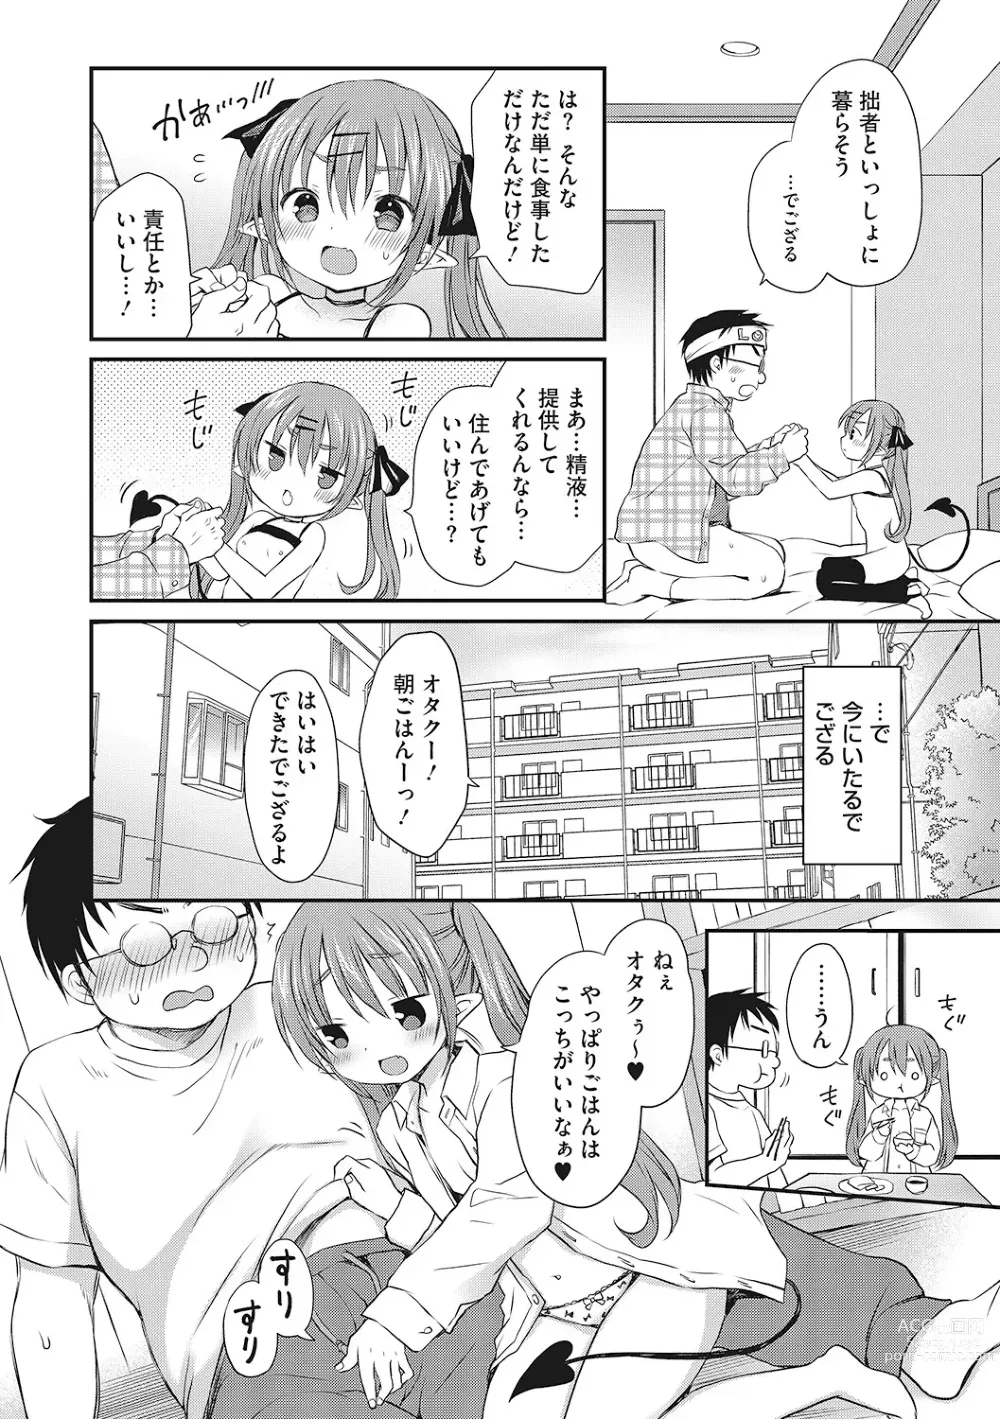 Page 11 of manga LQ -Little Queen- Vol. 53